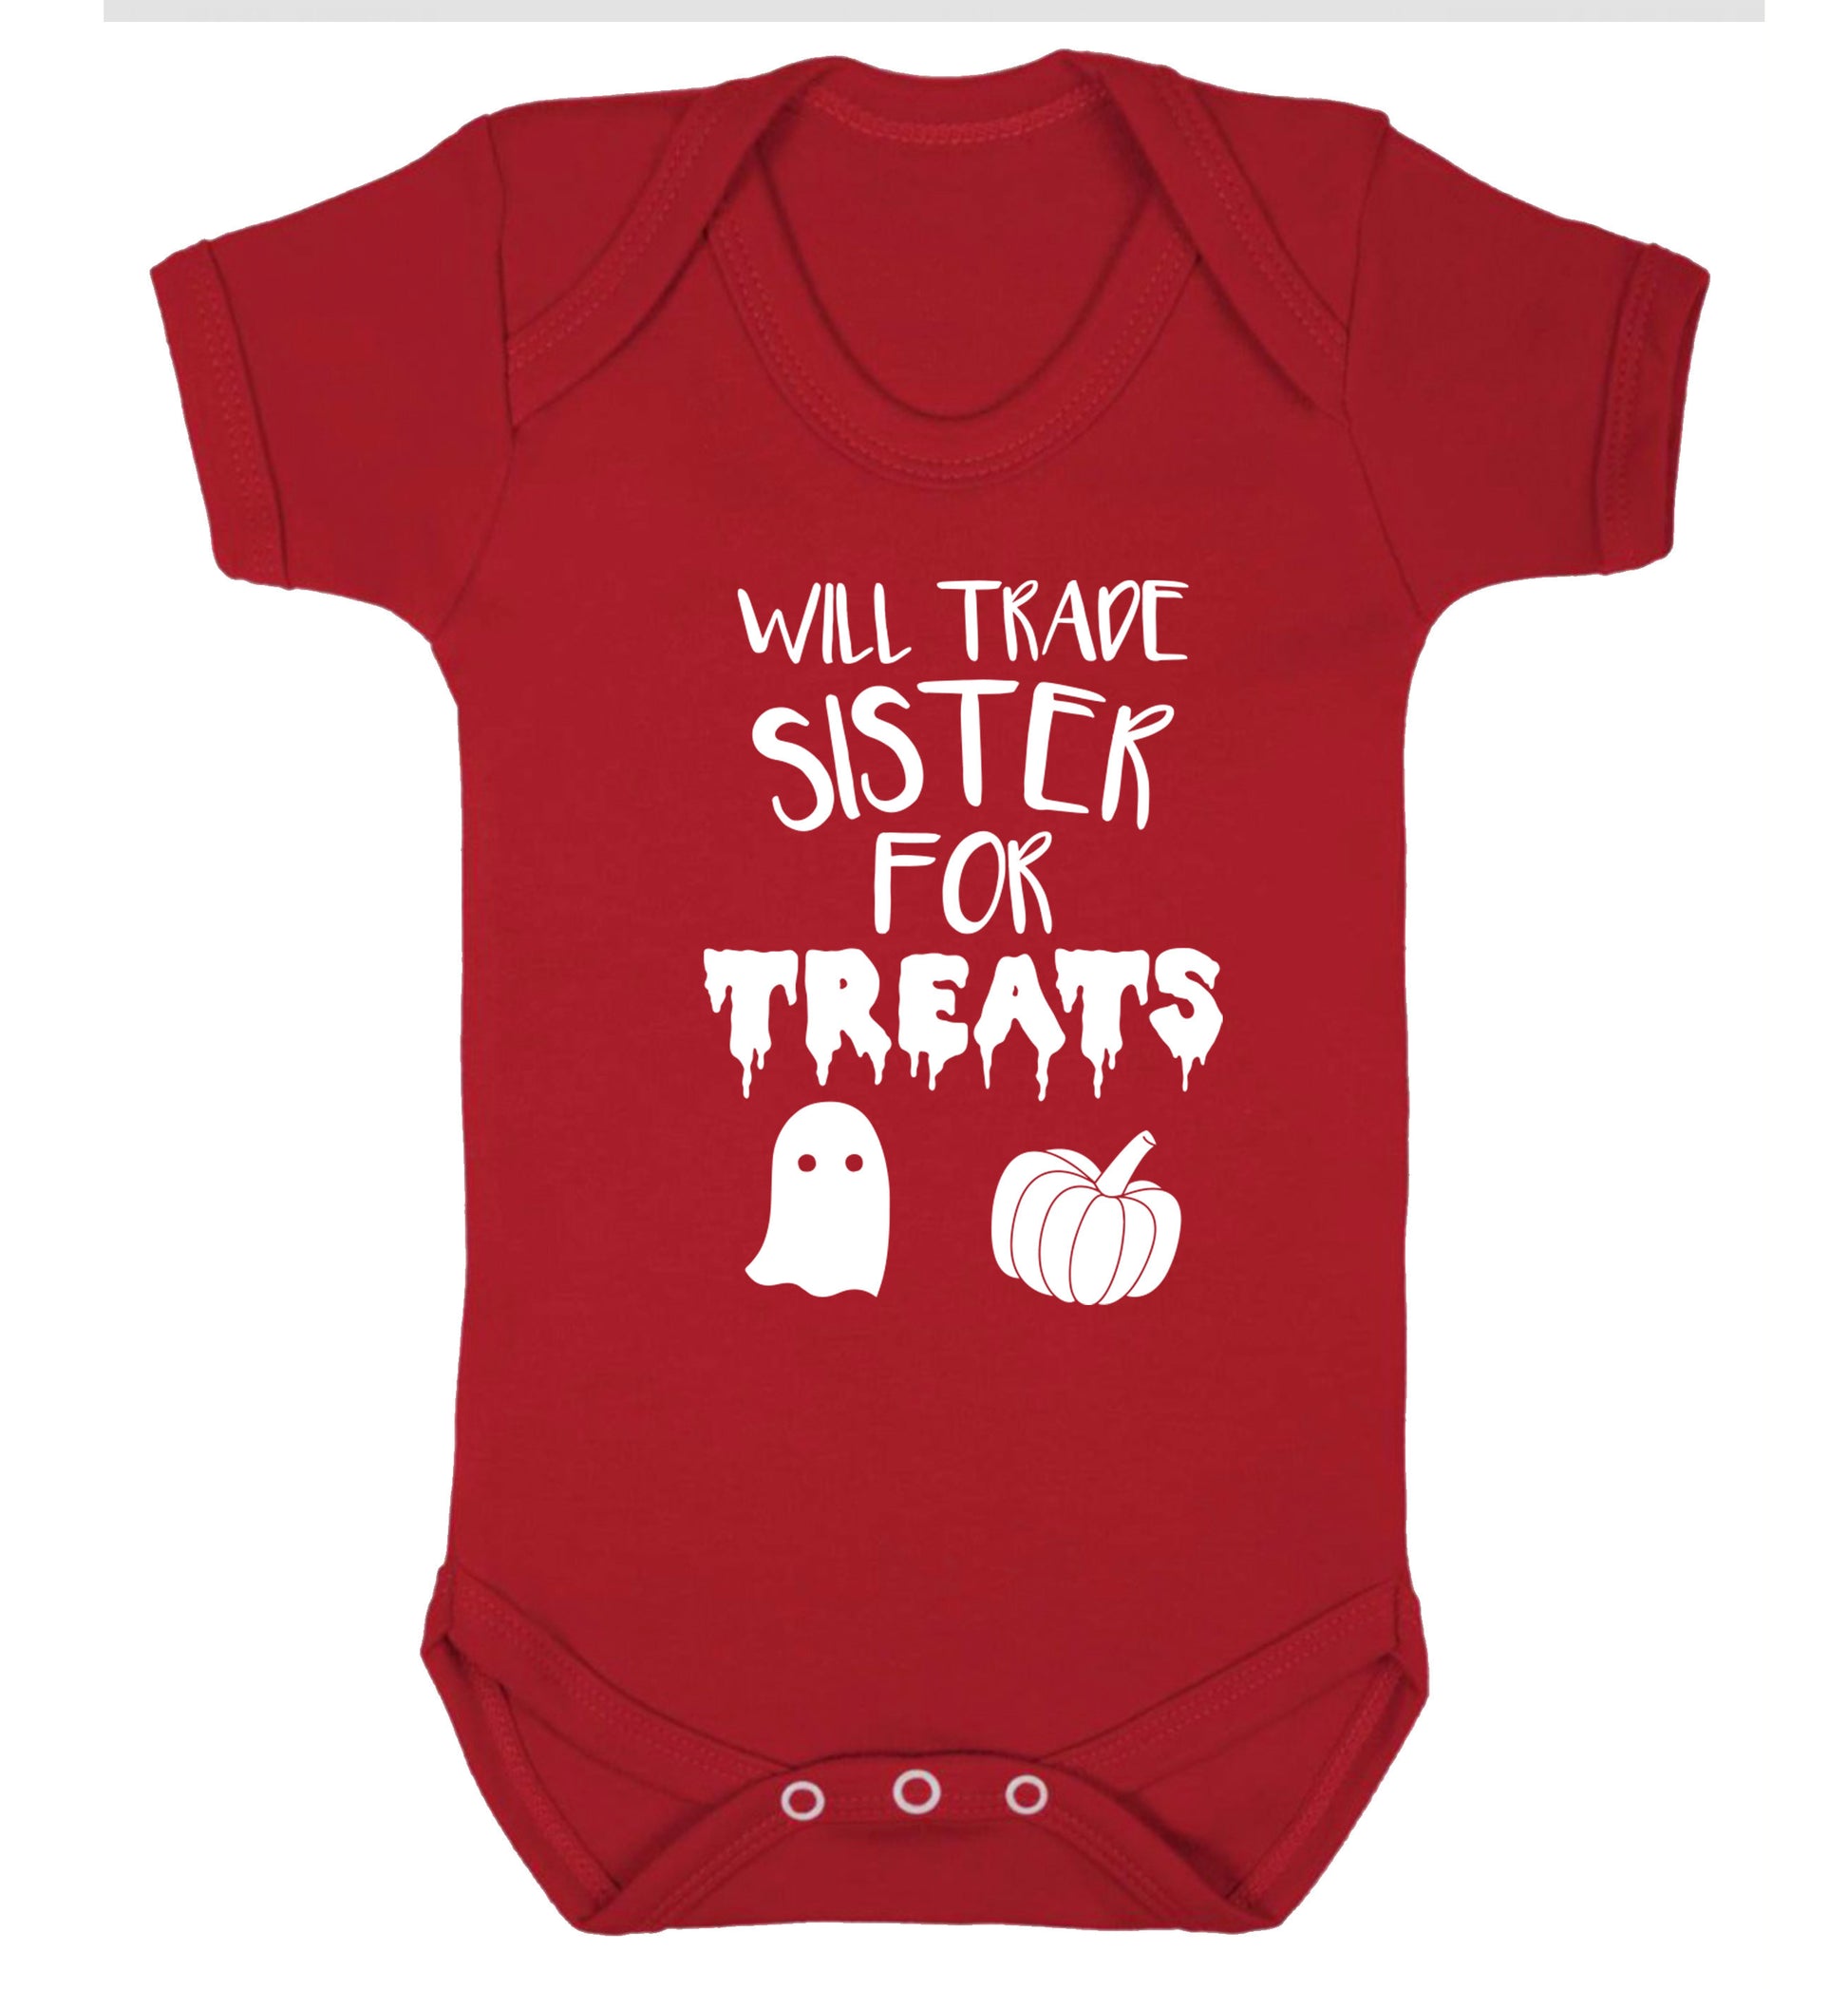 Will trade sister for treats Baby Vest red 18-24 months